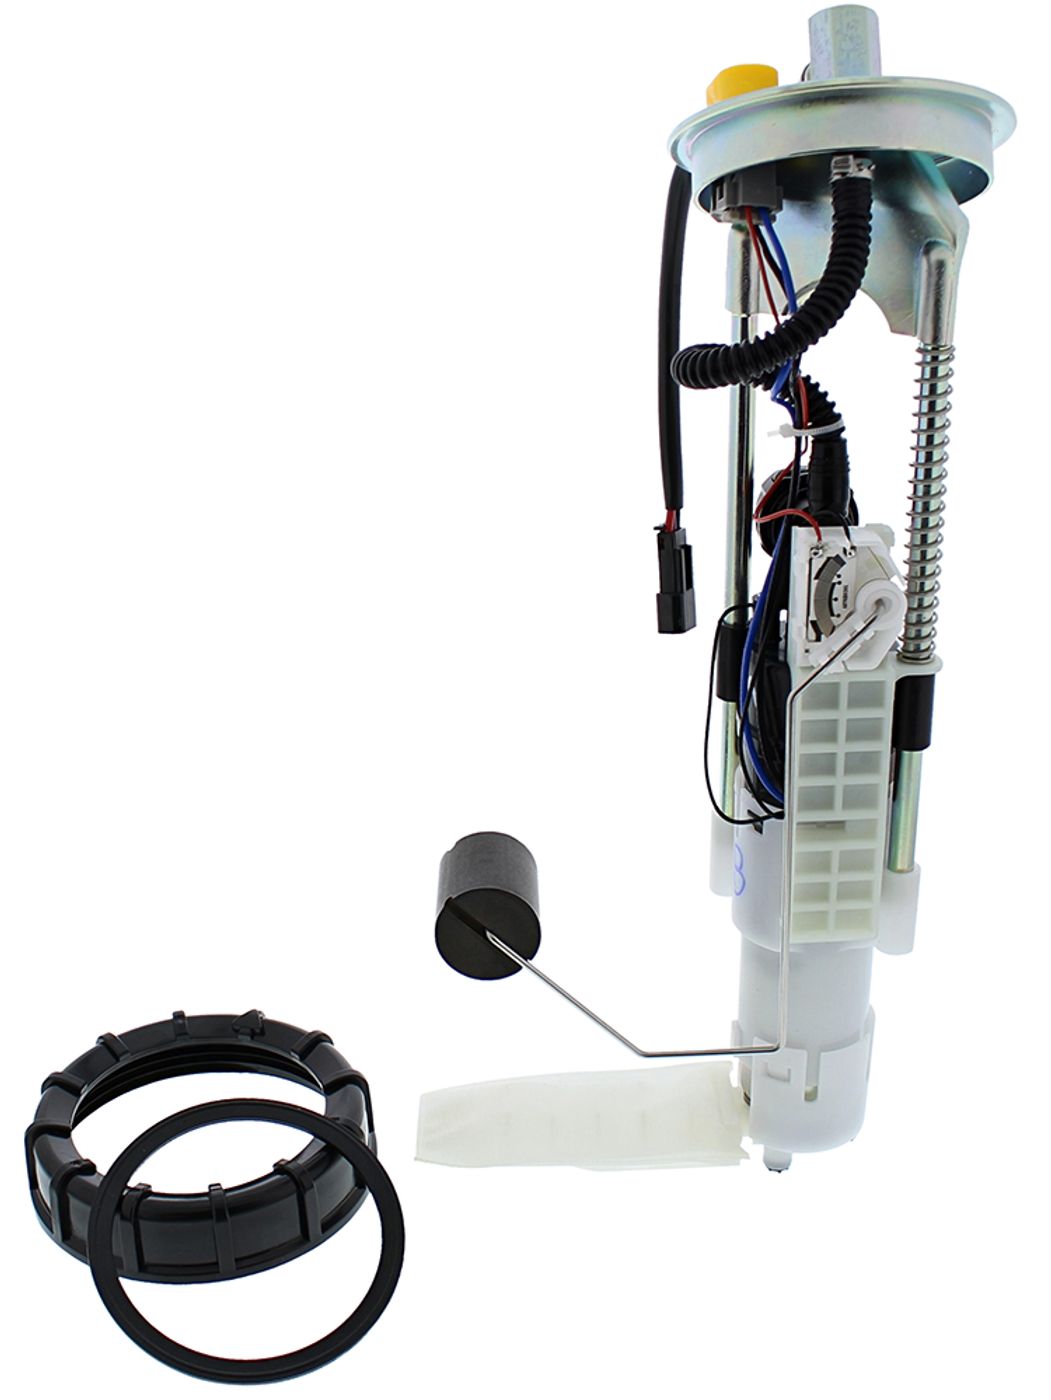 Wrp Fuel Pump Modules - WRP471014 image